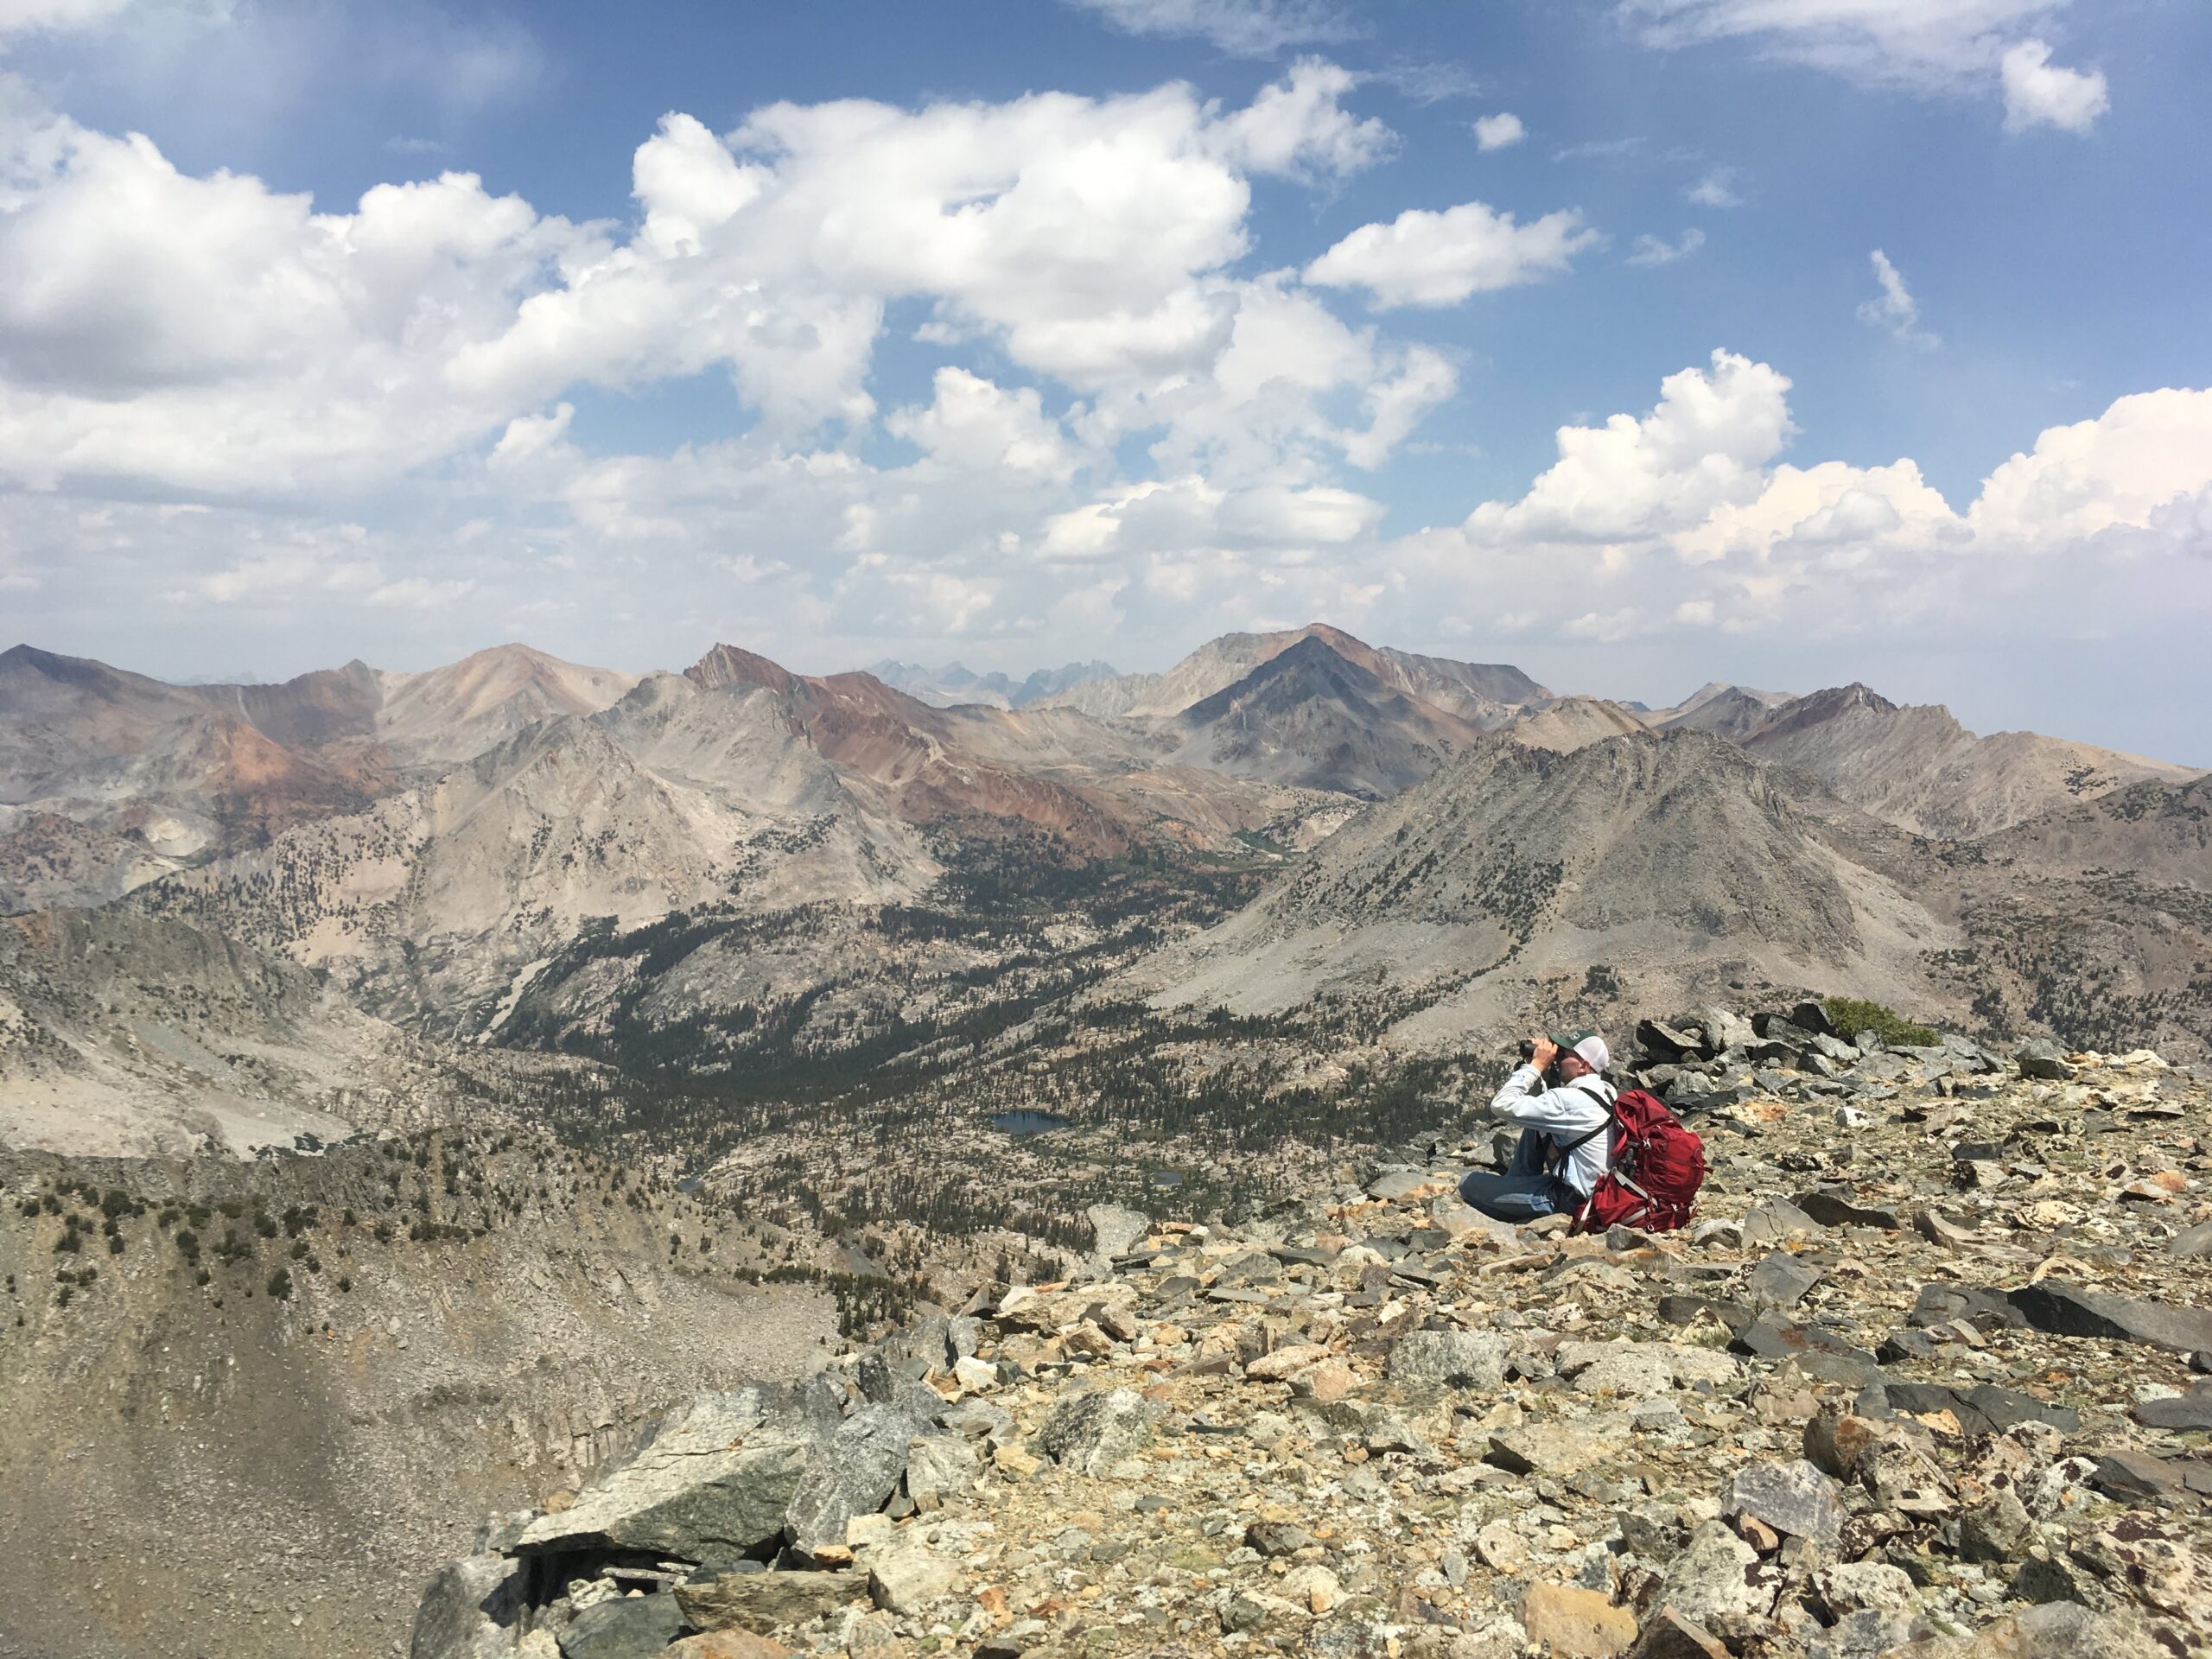 A person sits, wearing a backpack and looking through binoculars from the top of a rocky mountain: below, rocky slopes, forest, and a lake are shown.